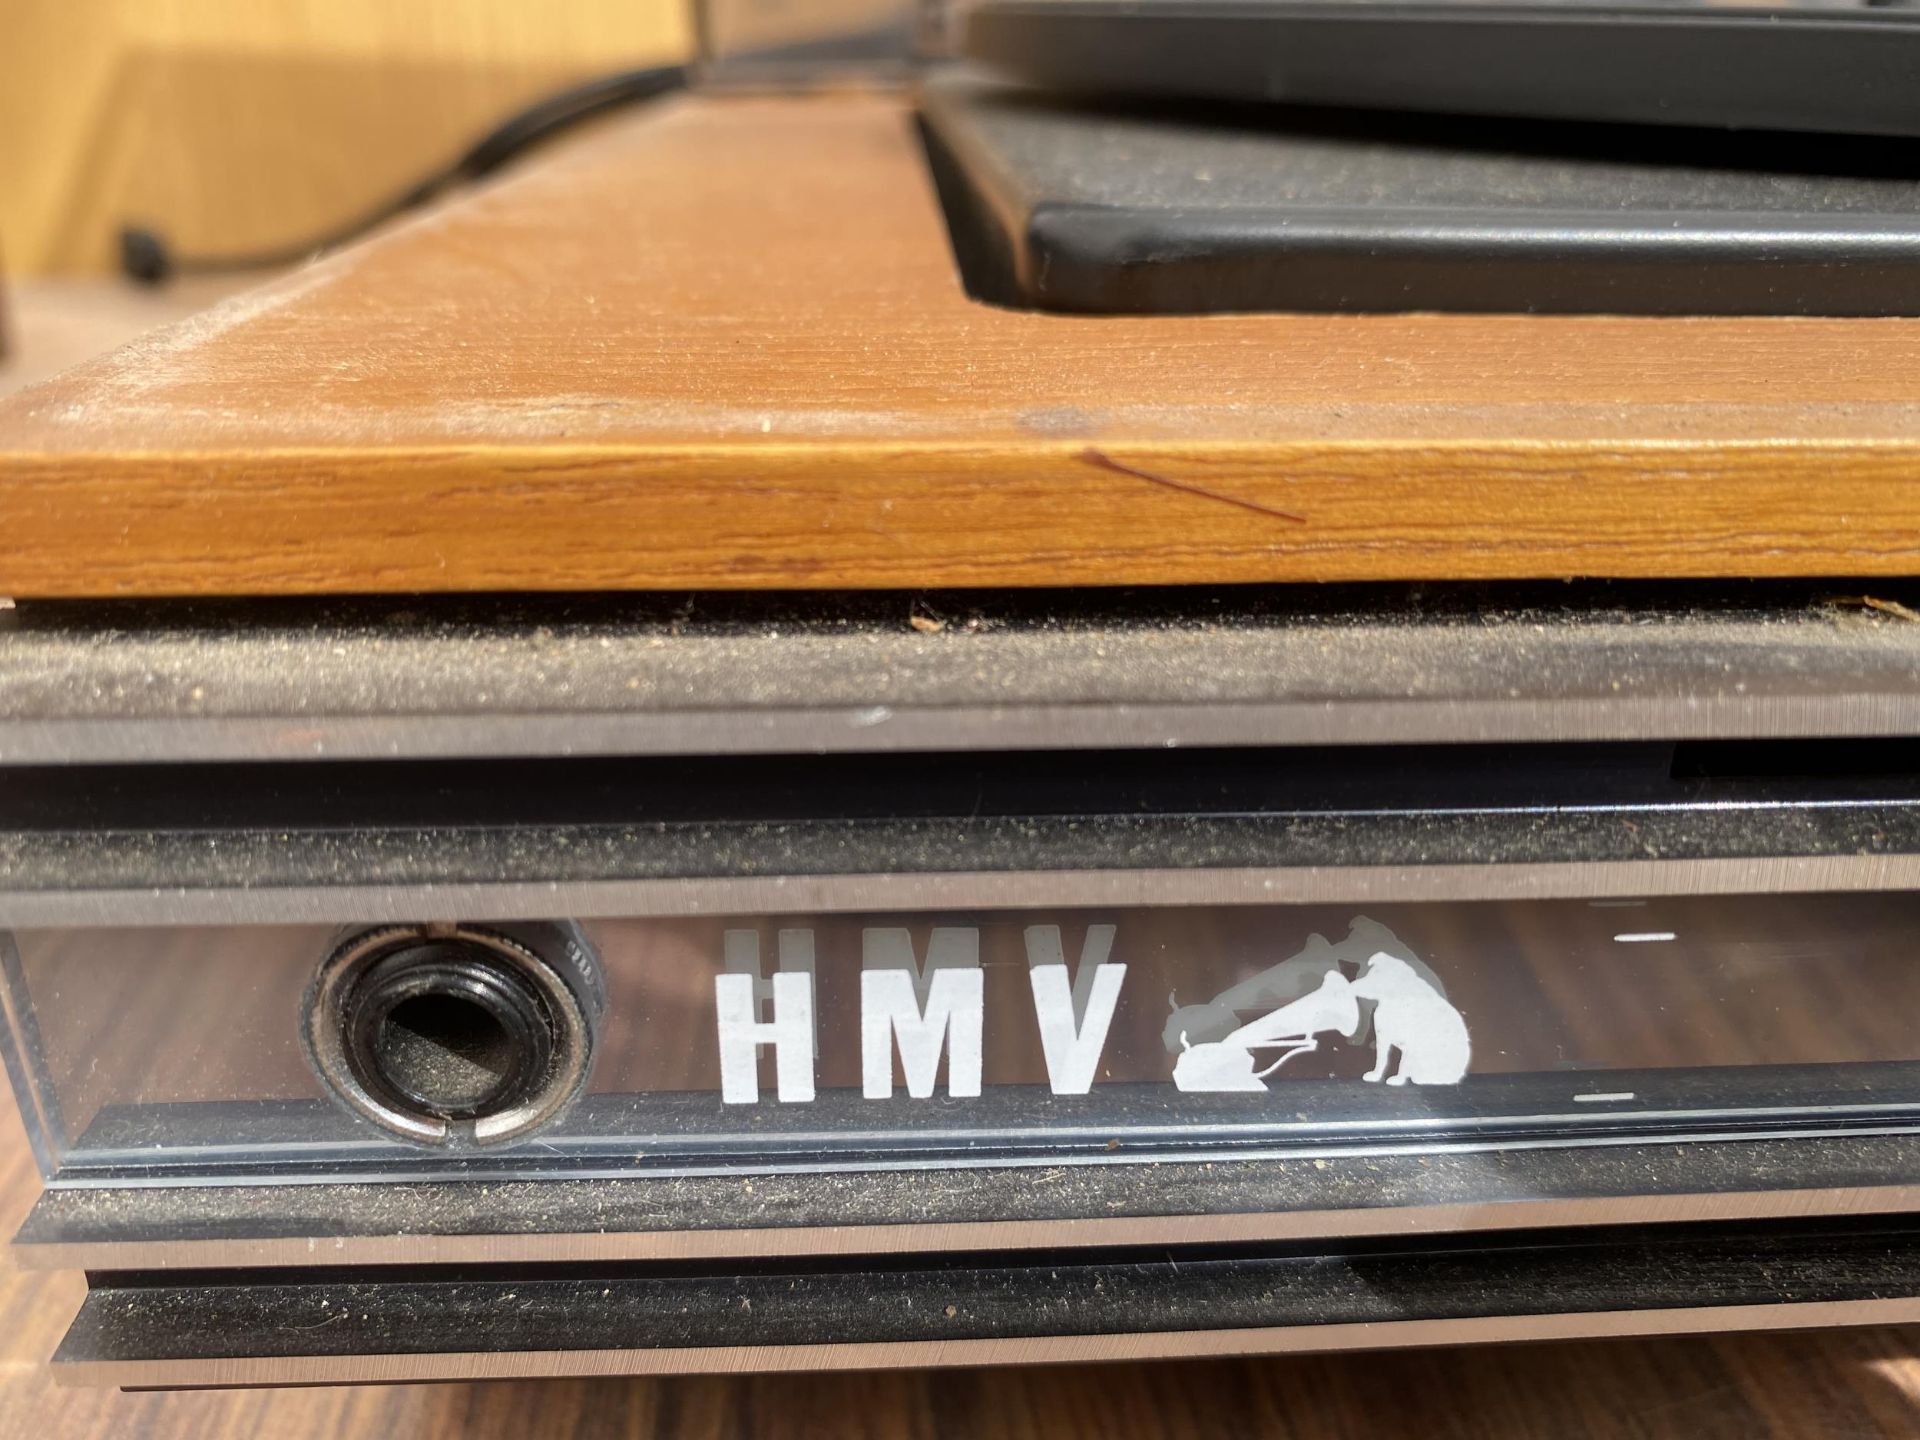 A HMV BSR RECORD PLAYER AND A VIRGIN MEDIA BOX - Image 4 of 4